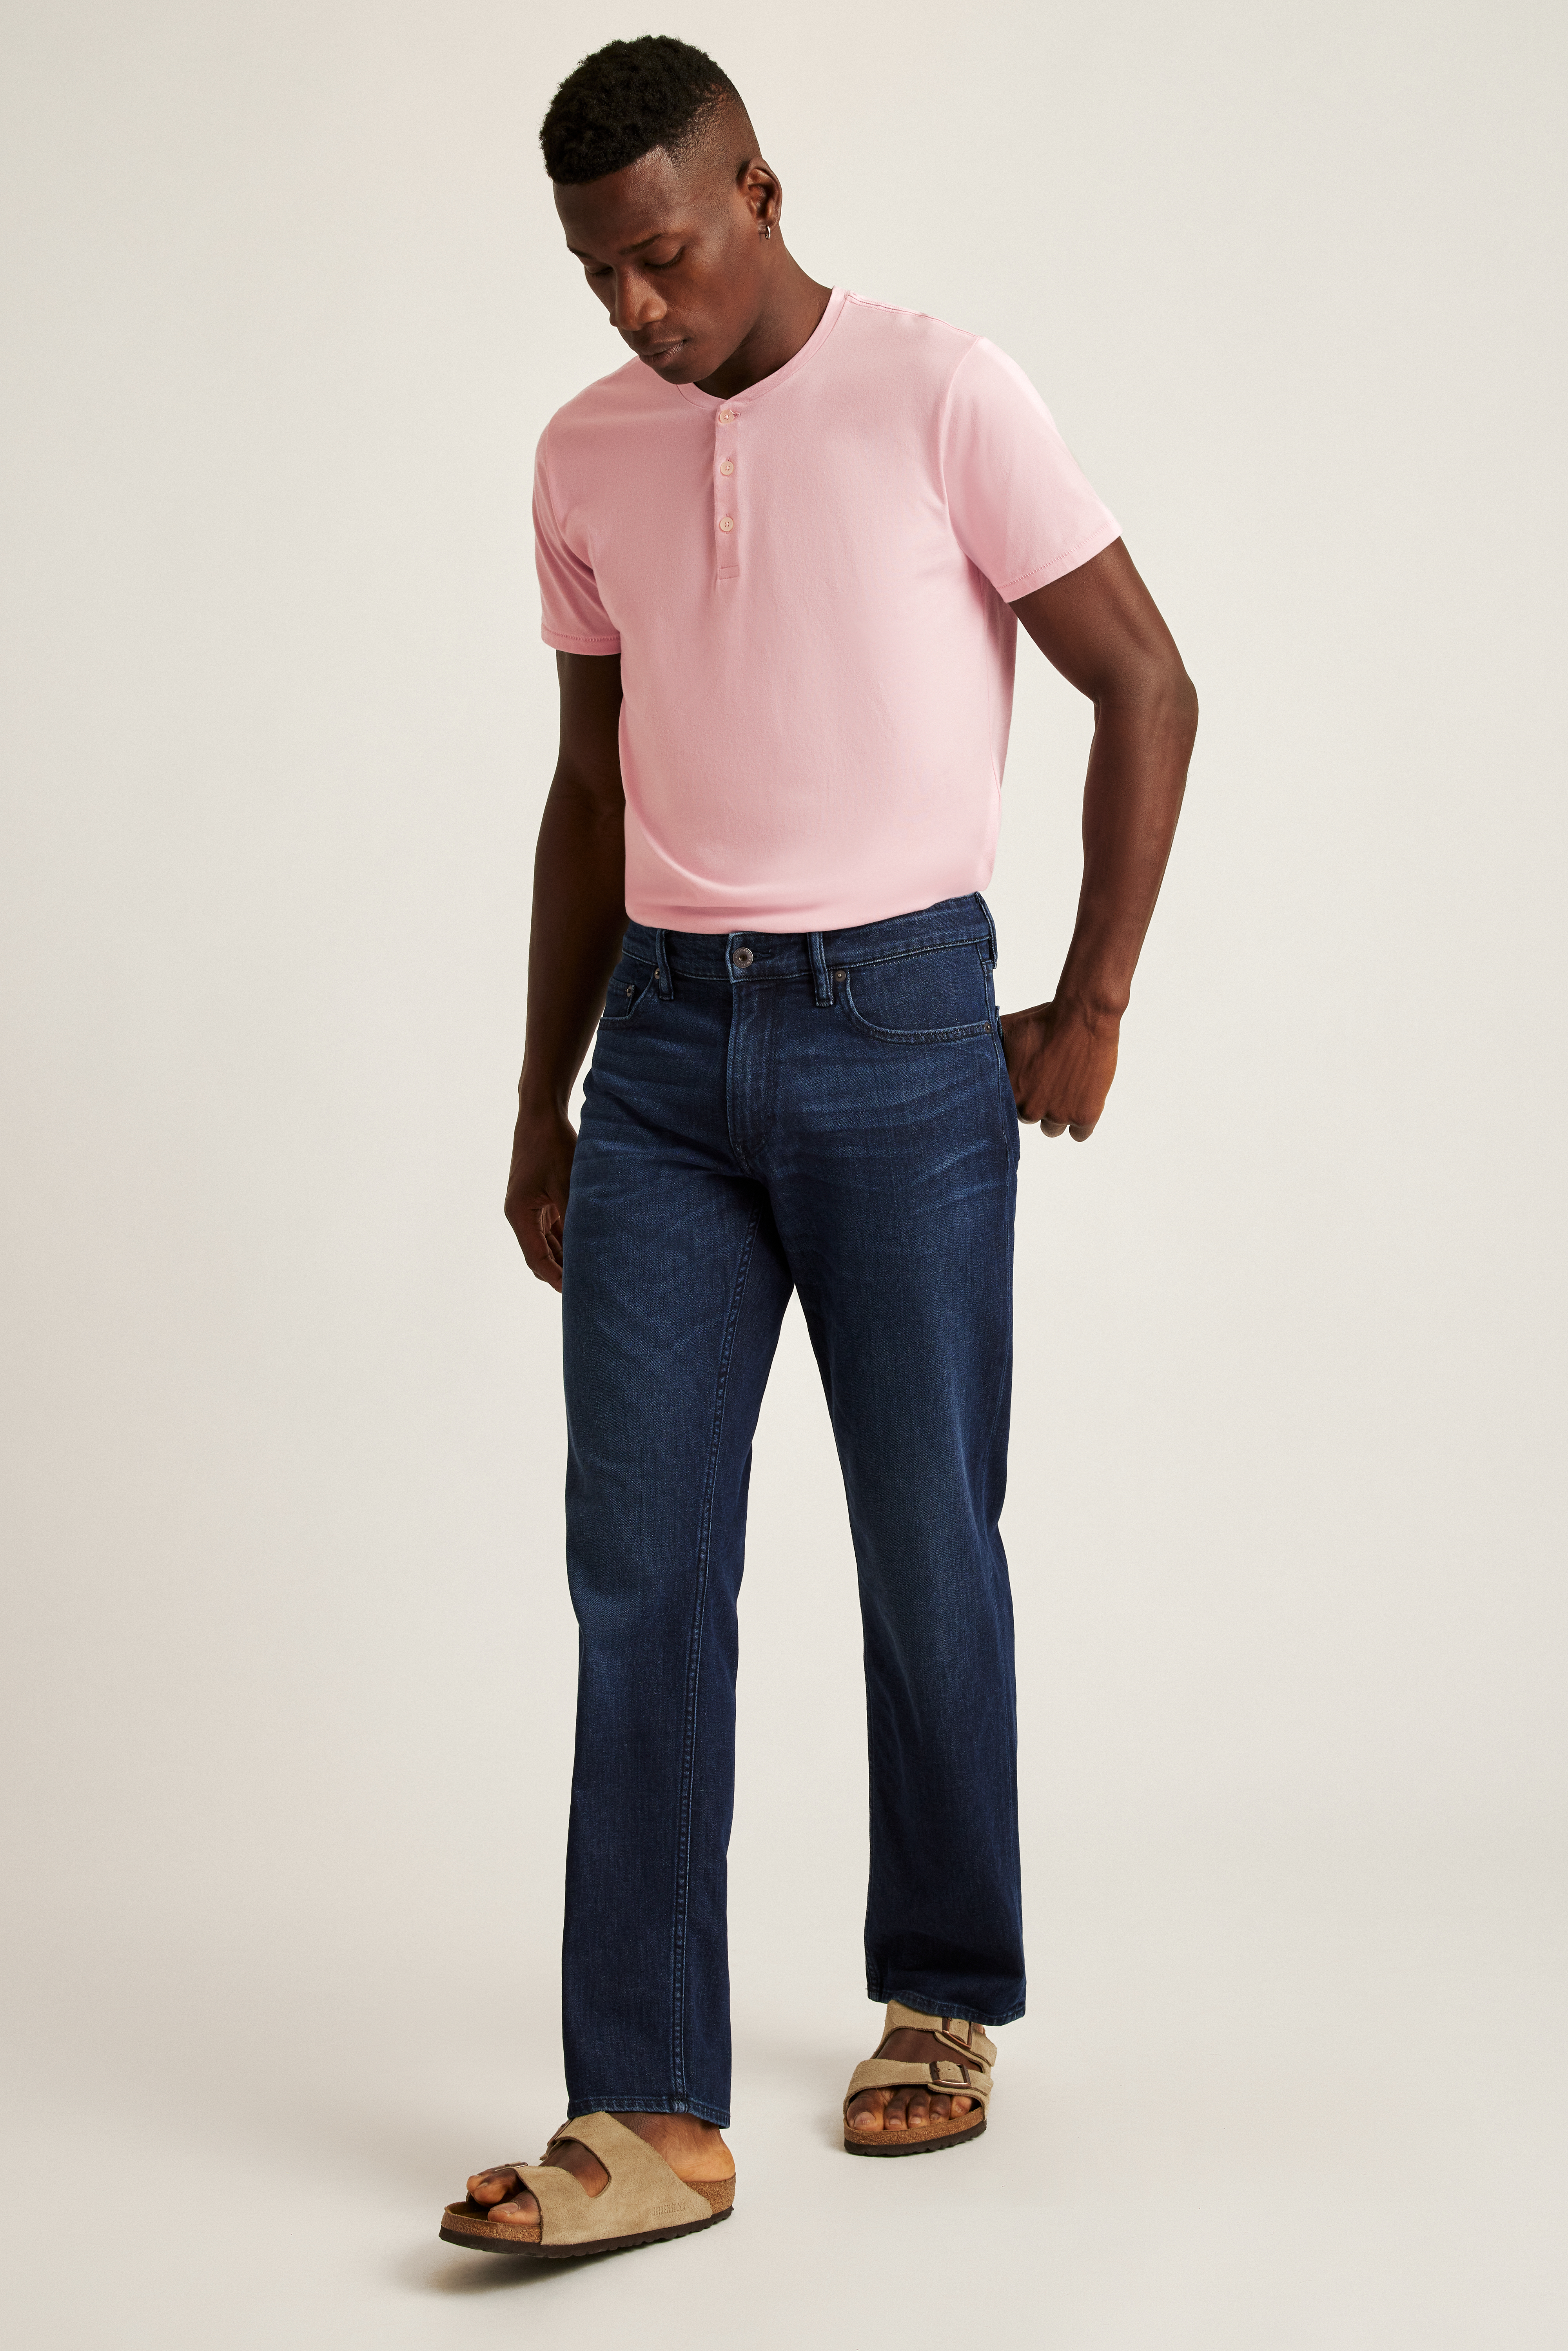 Redefine Comfort with Bonobos' Stretch Lightweight Jeans